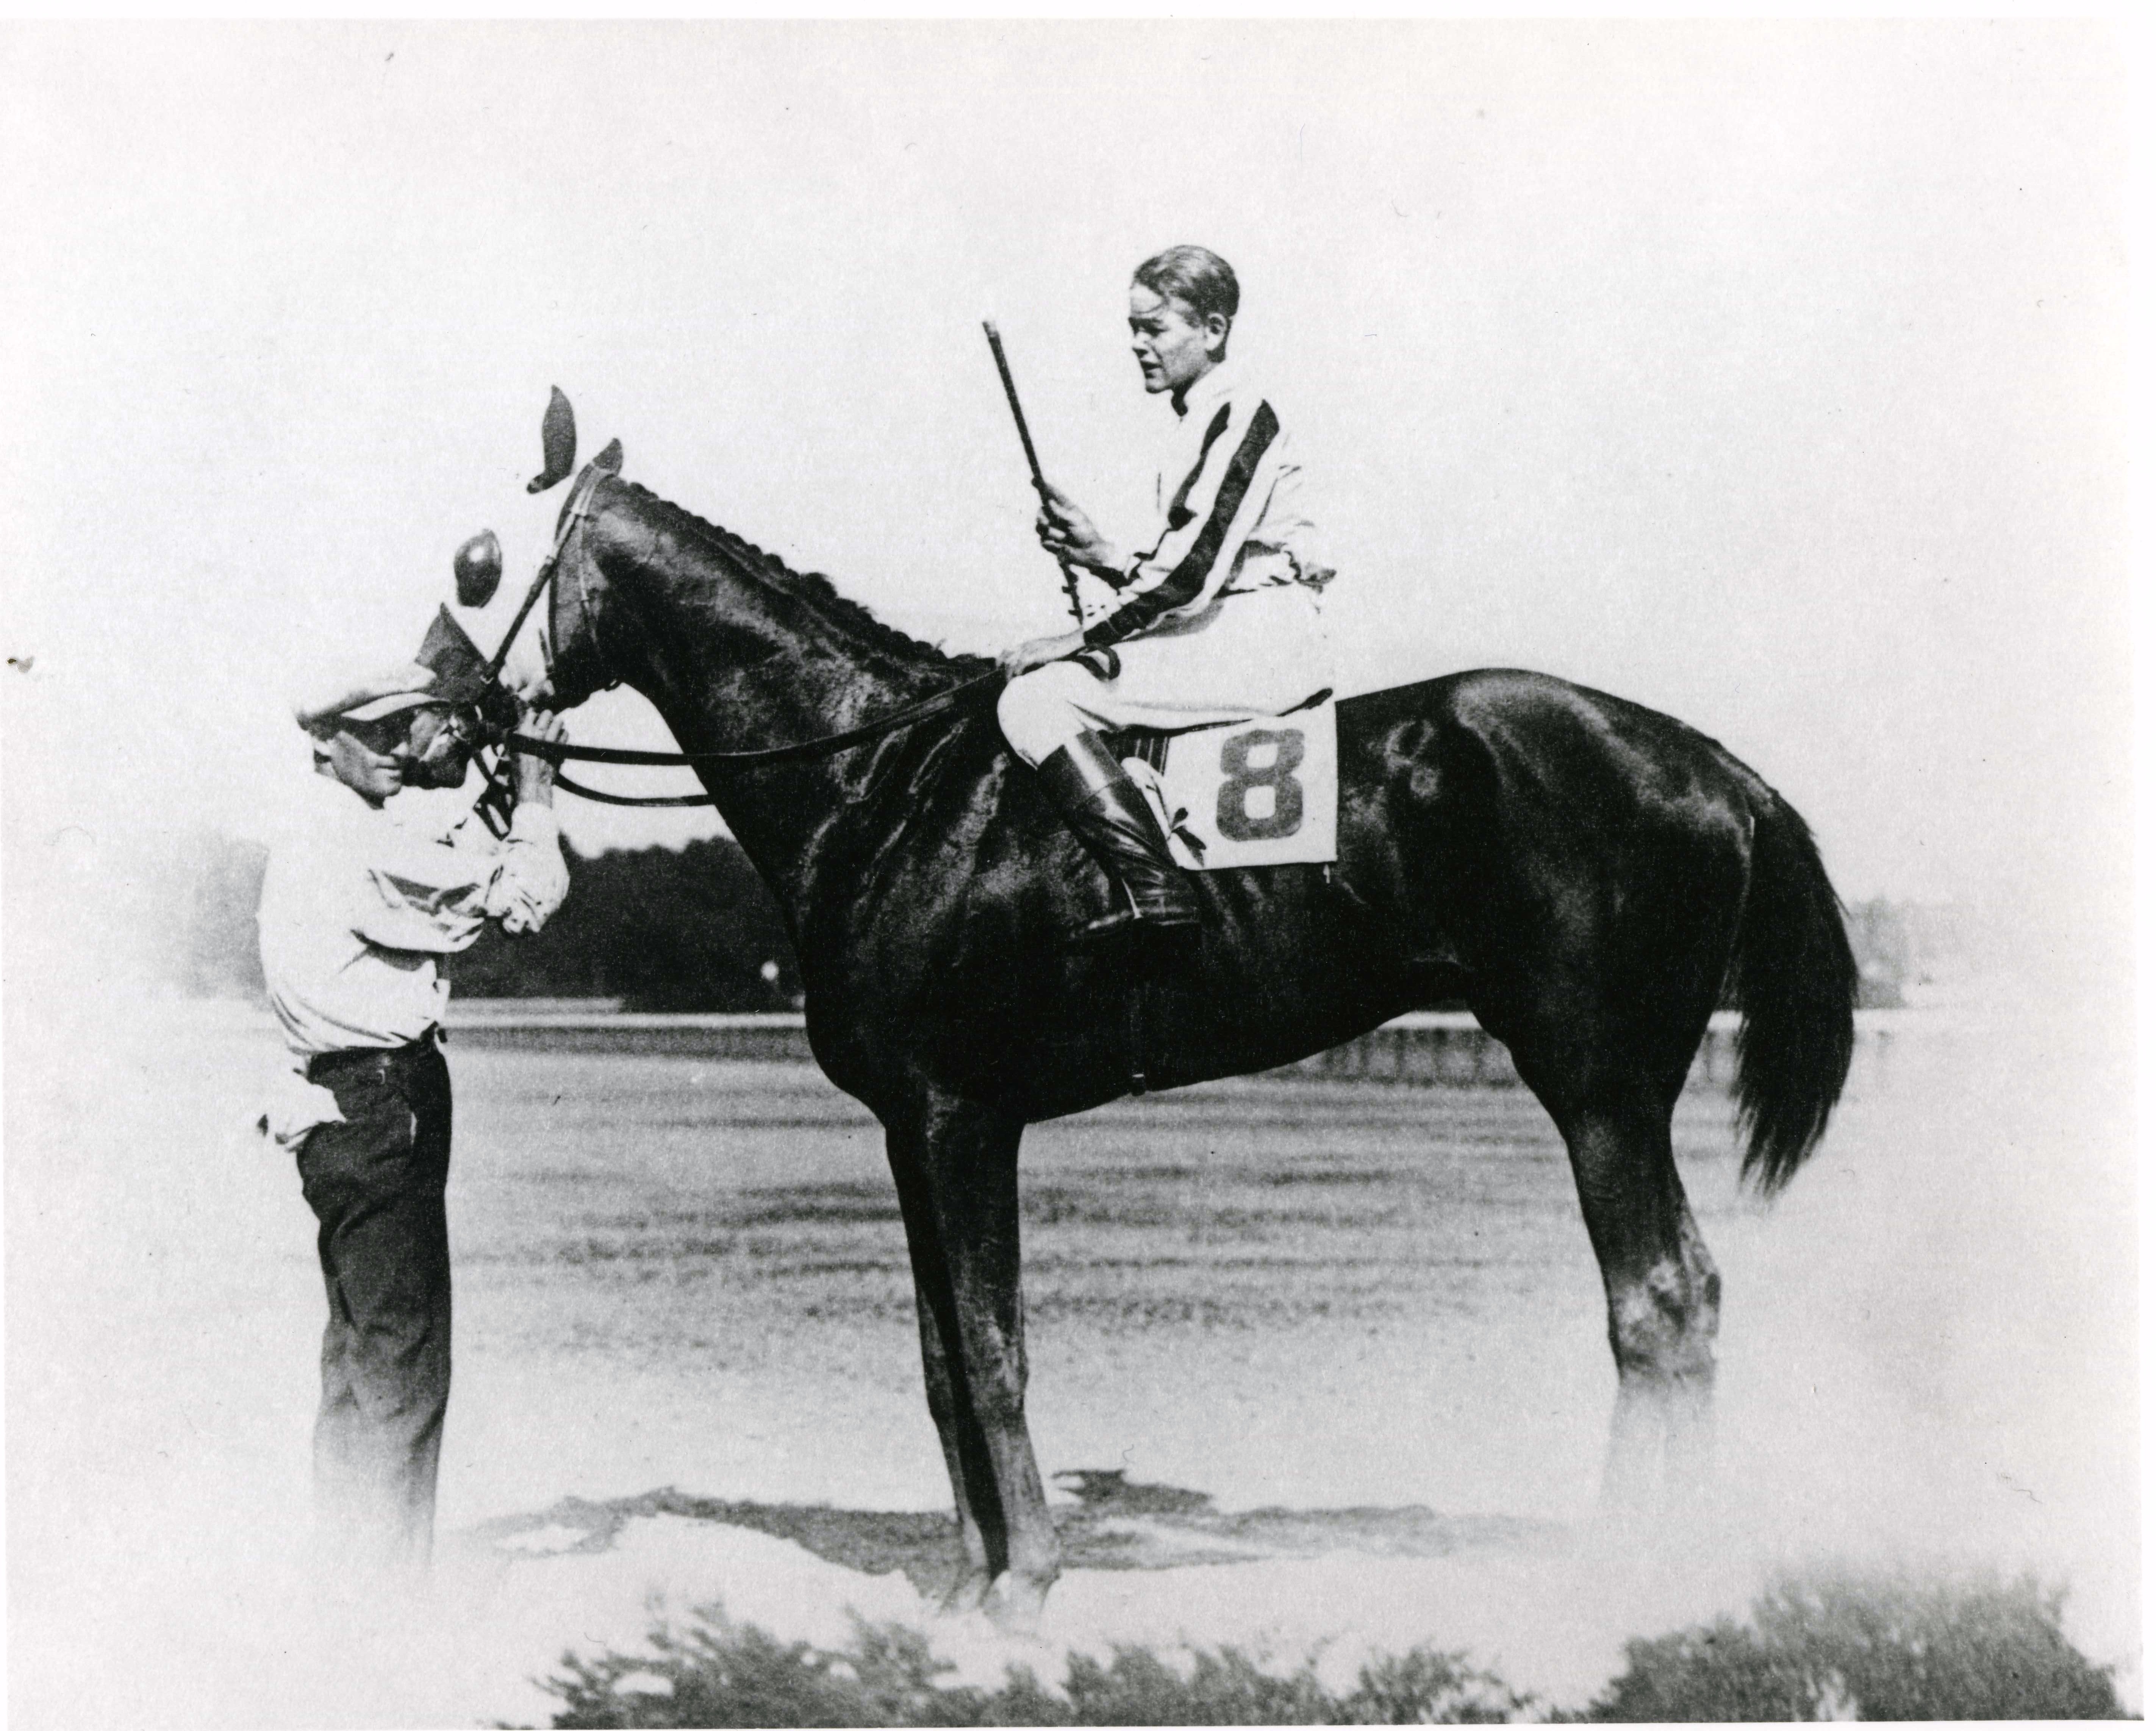 Ivan Parke and Cherry Pie in the winner's circle after winning a race at Saratoga, August 1924 (H. C. Ashby/Museum Collection)